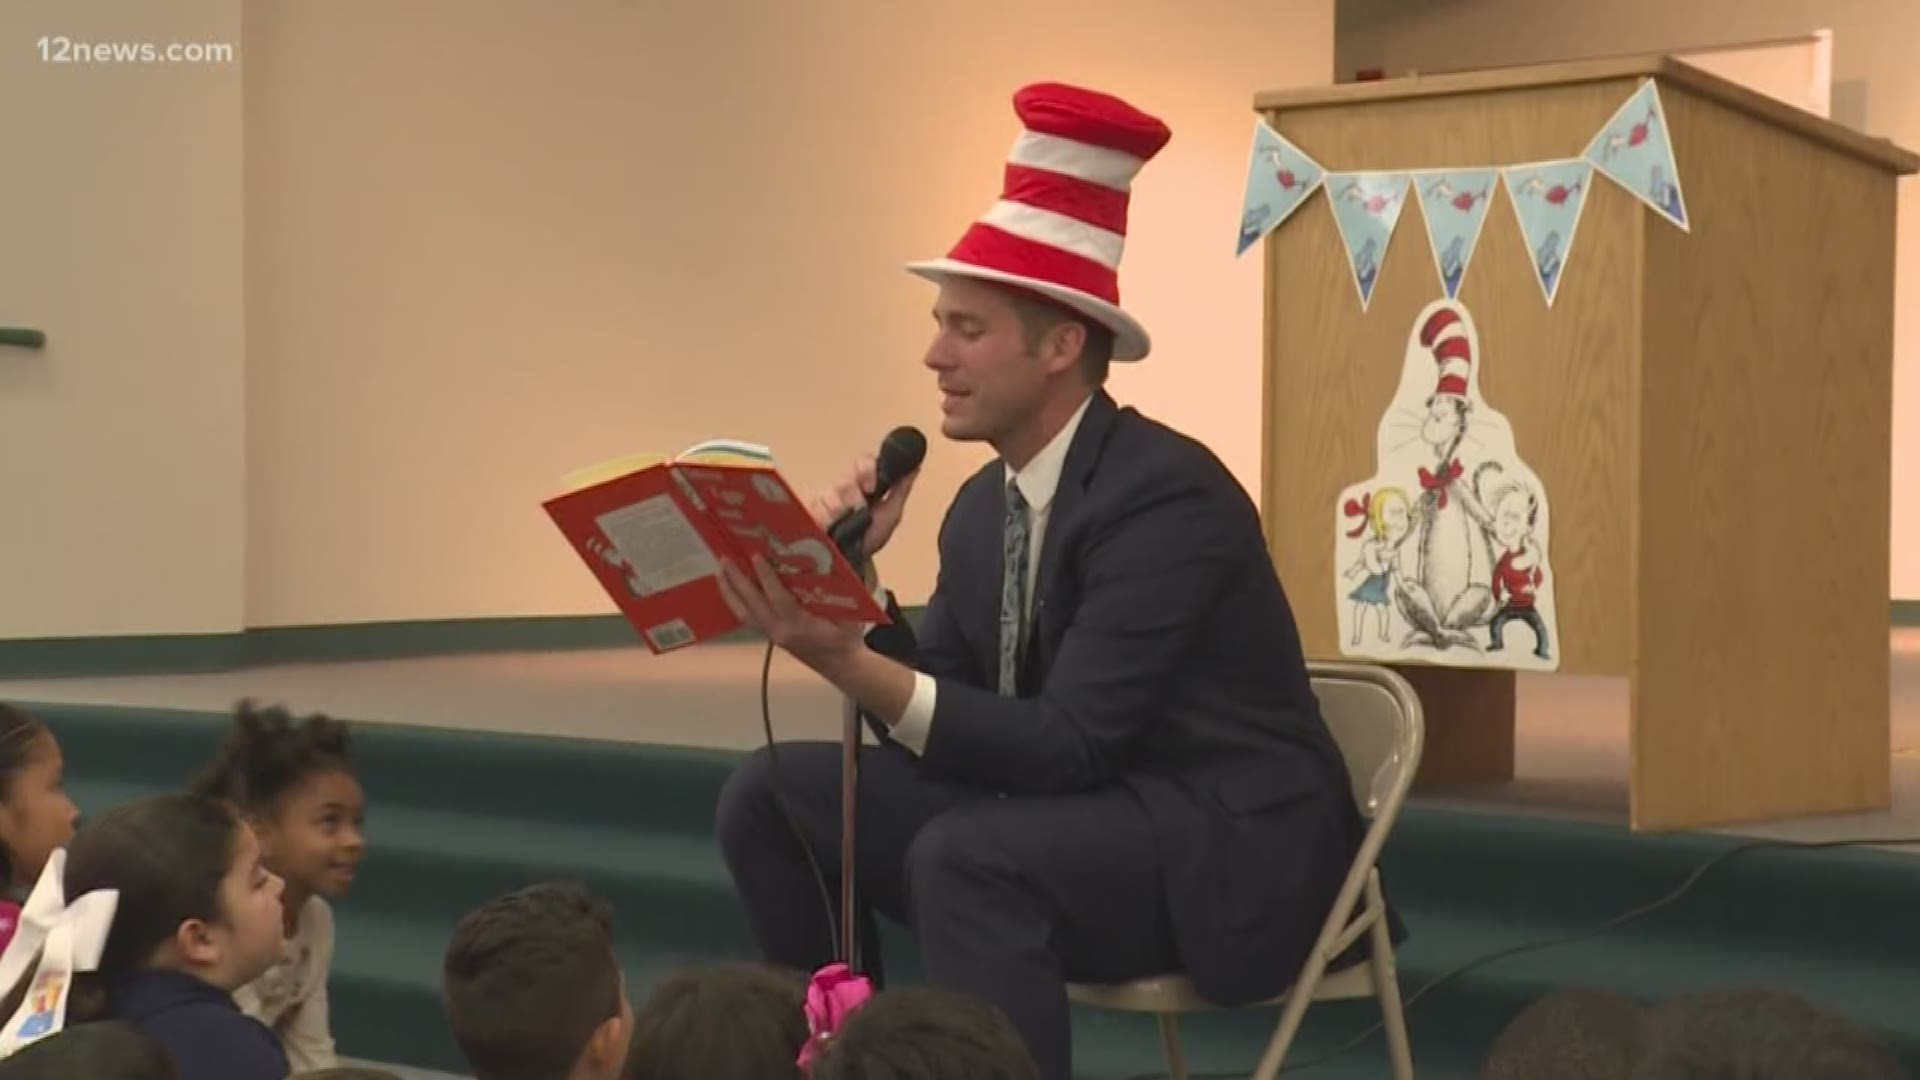 Our own Paul Gerke shared his love of reading with kindergartners and 1st graders at Alhambra Elementary School. He even dressed the part as he read the kids "Cat in the Hat".